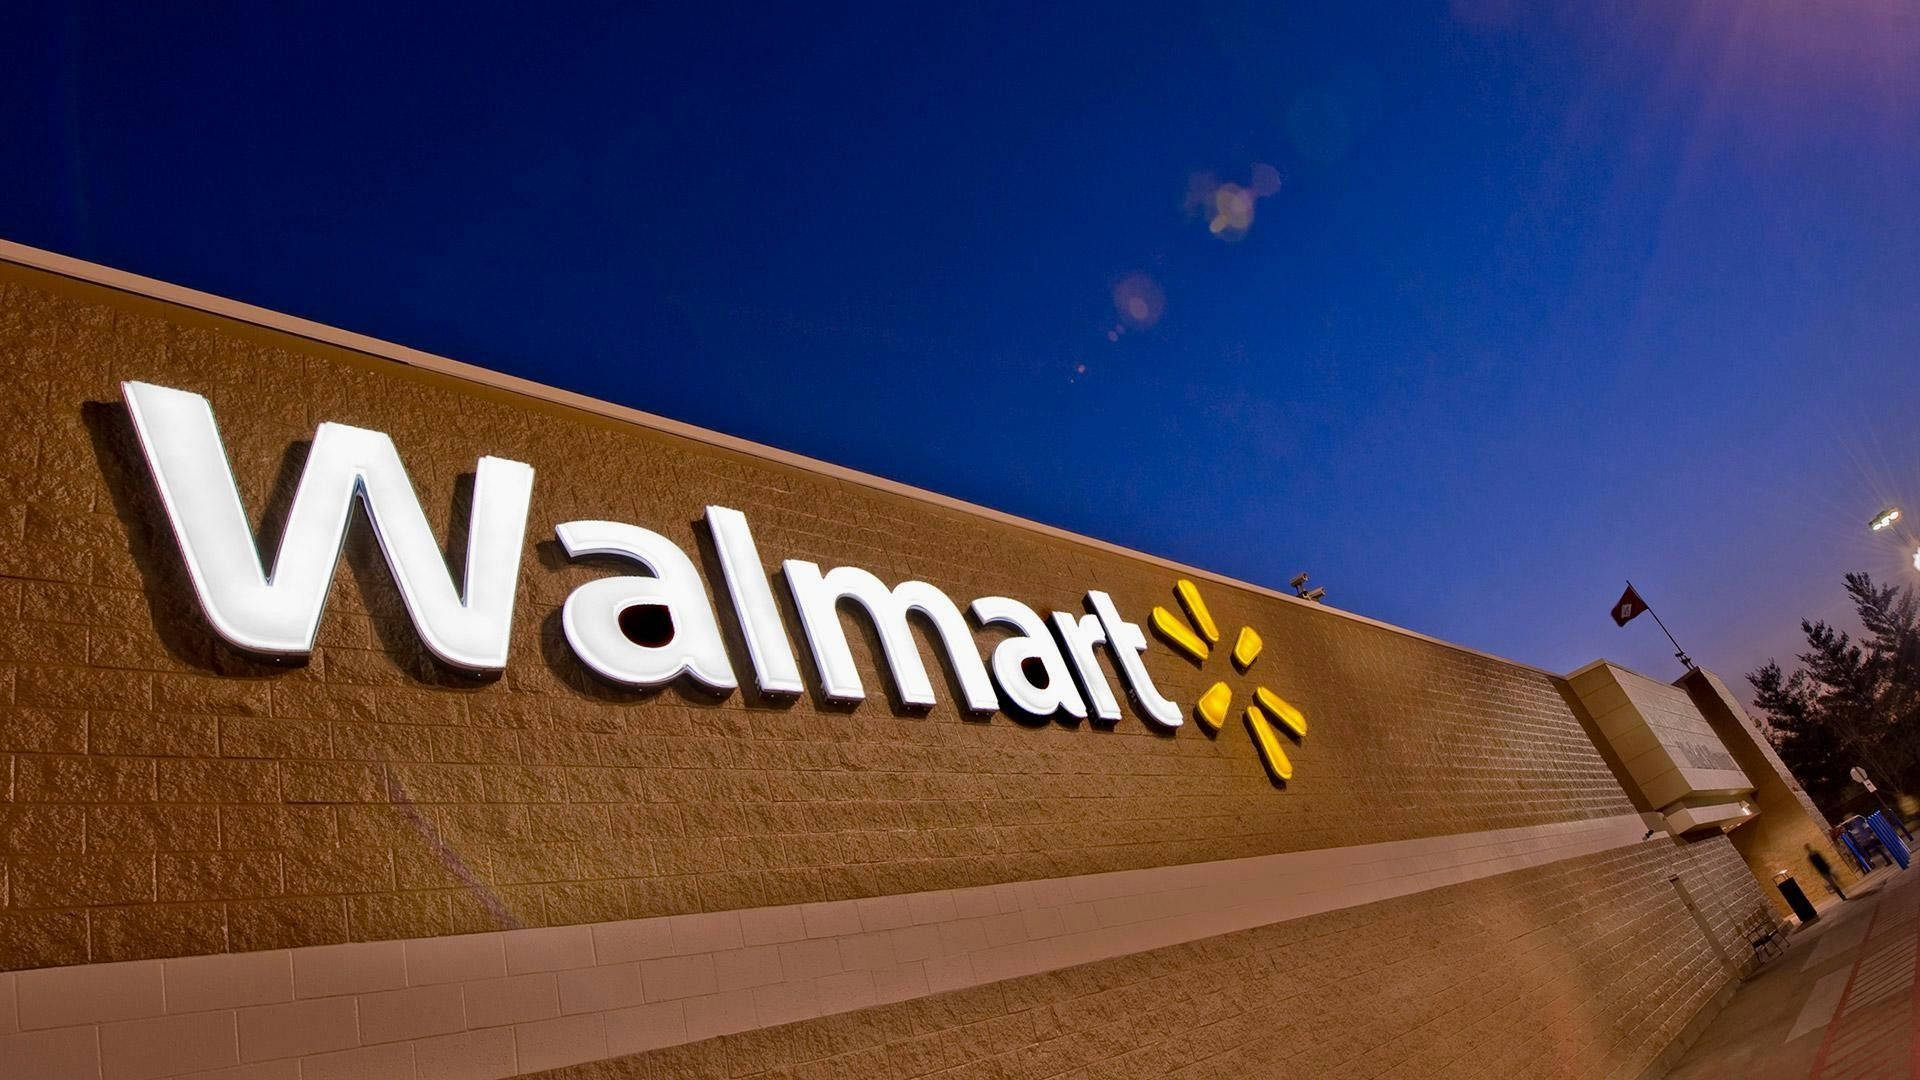 Walmart 1920X1080 Wallpaper and Background Image